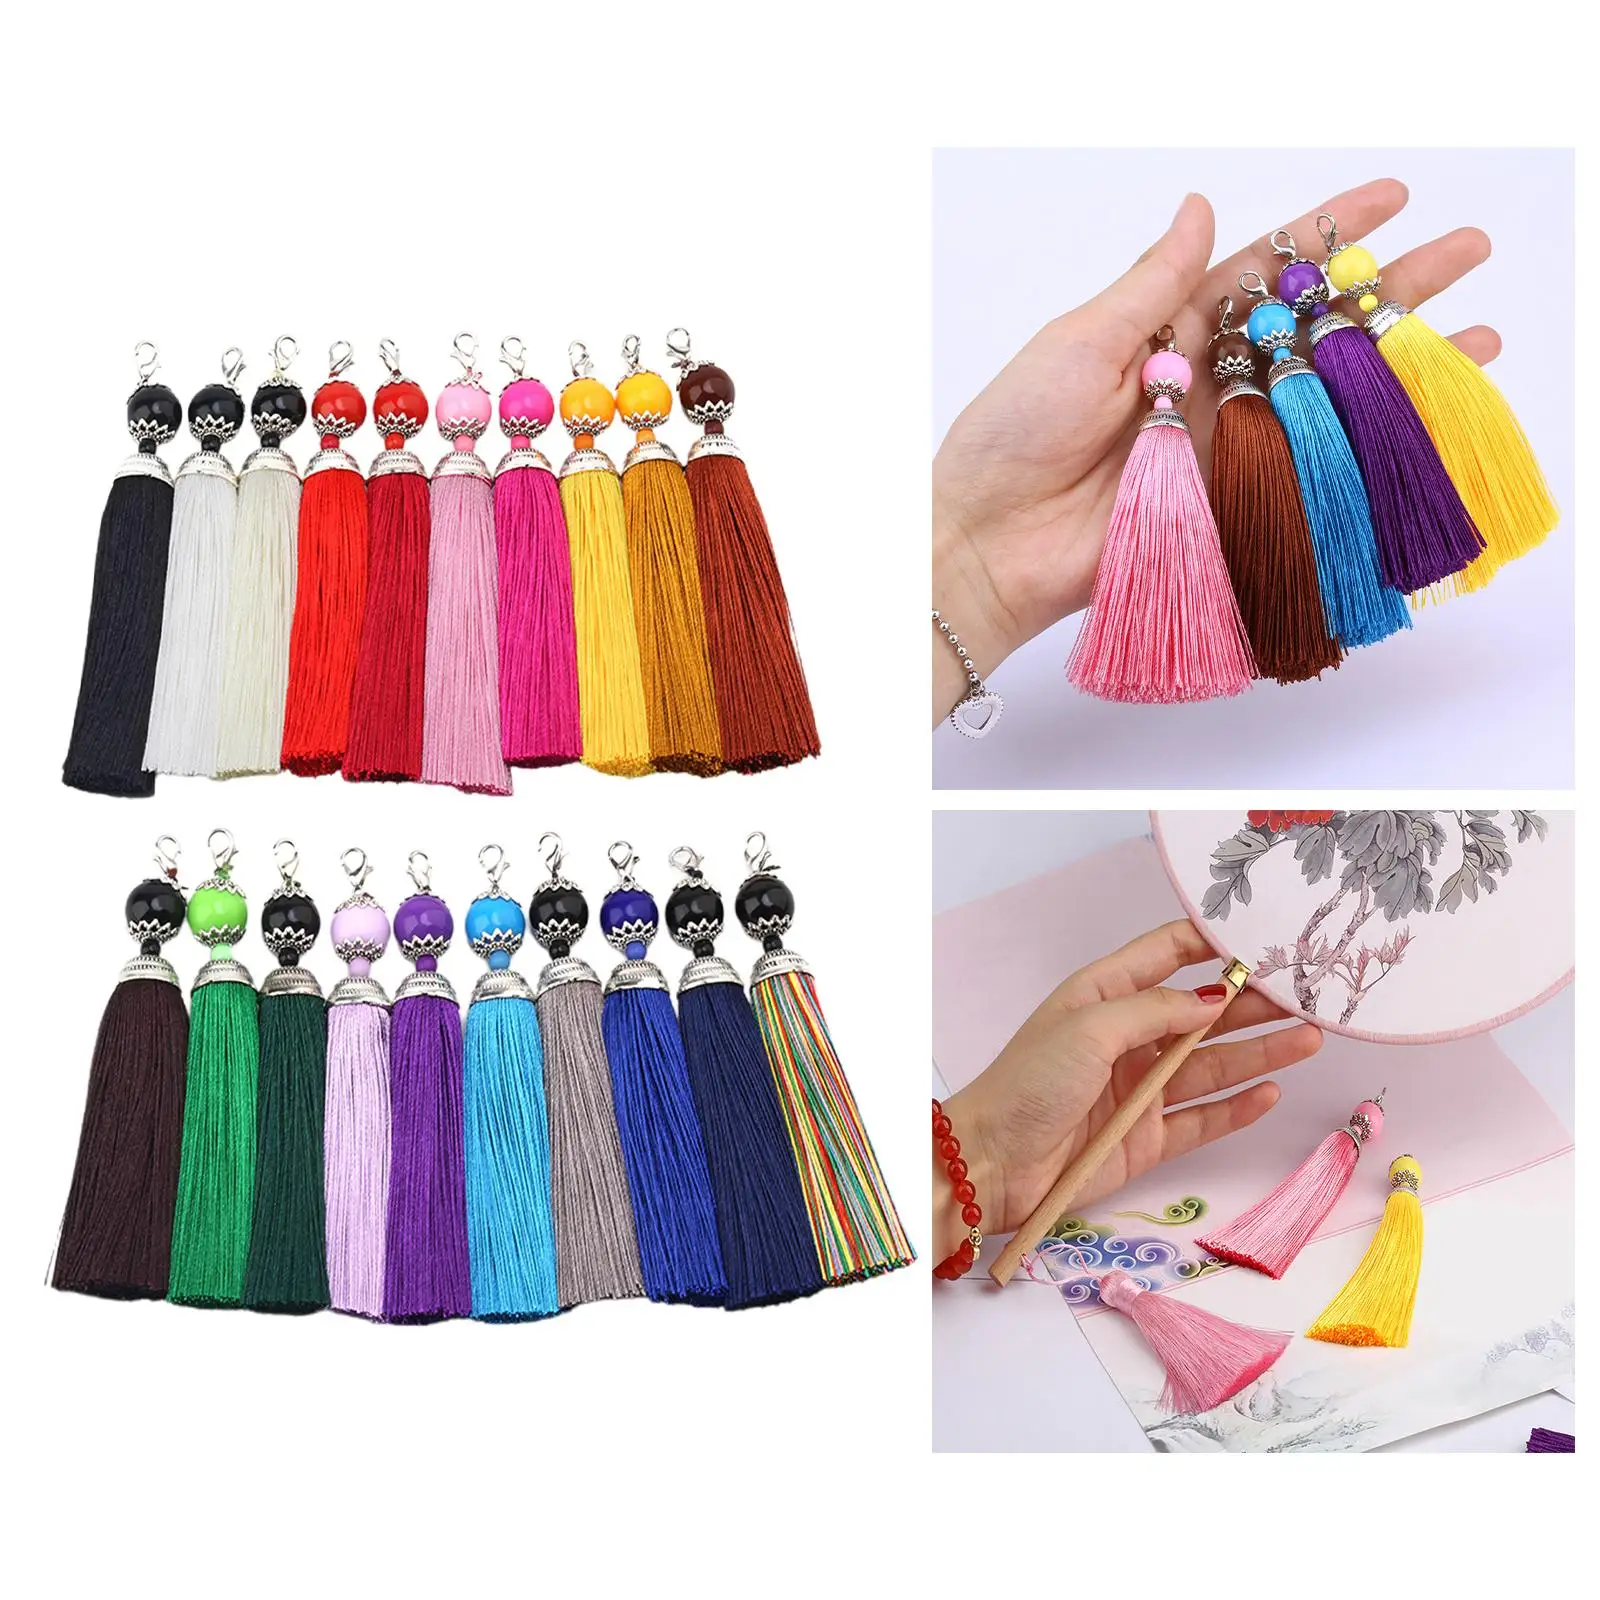 10x Tassels for Jewelry Making, with Lobster Buckle Decorative Handmade Tassels Decorative Tassels for Handbag Keychain Earrings